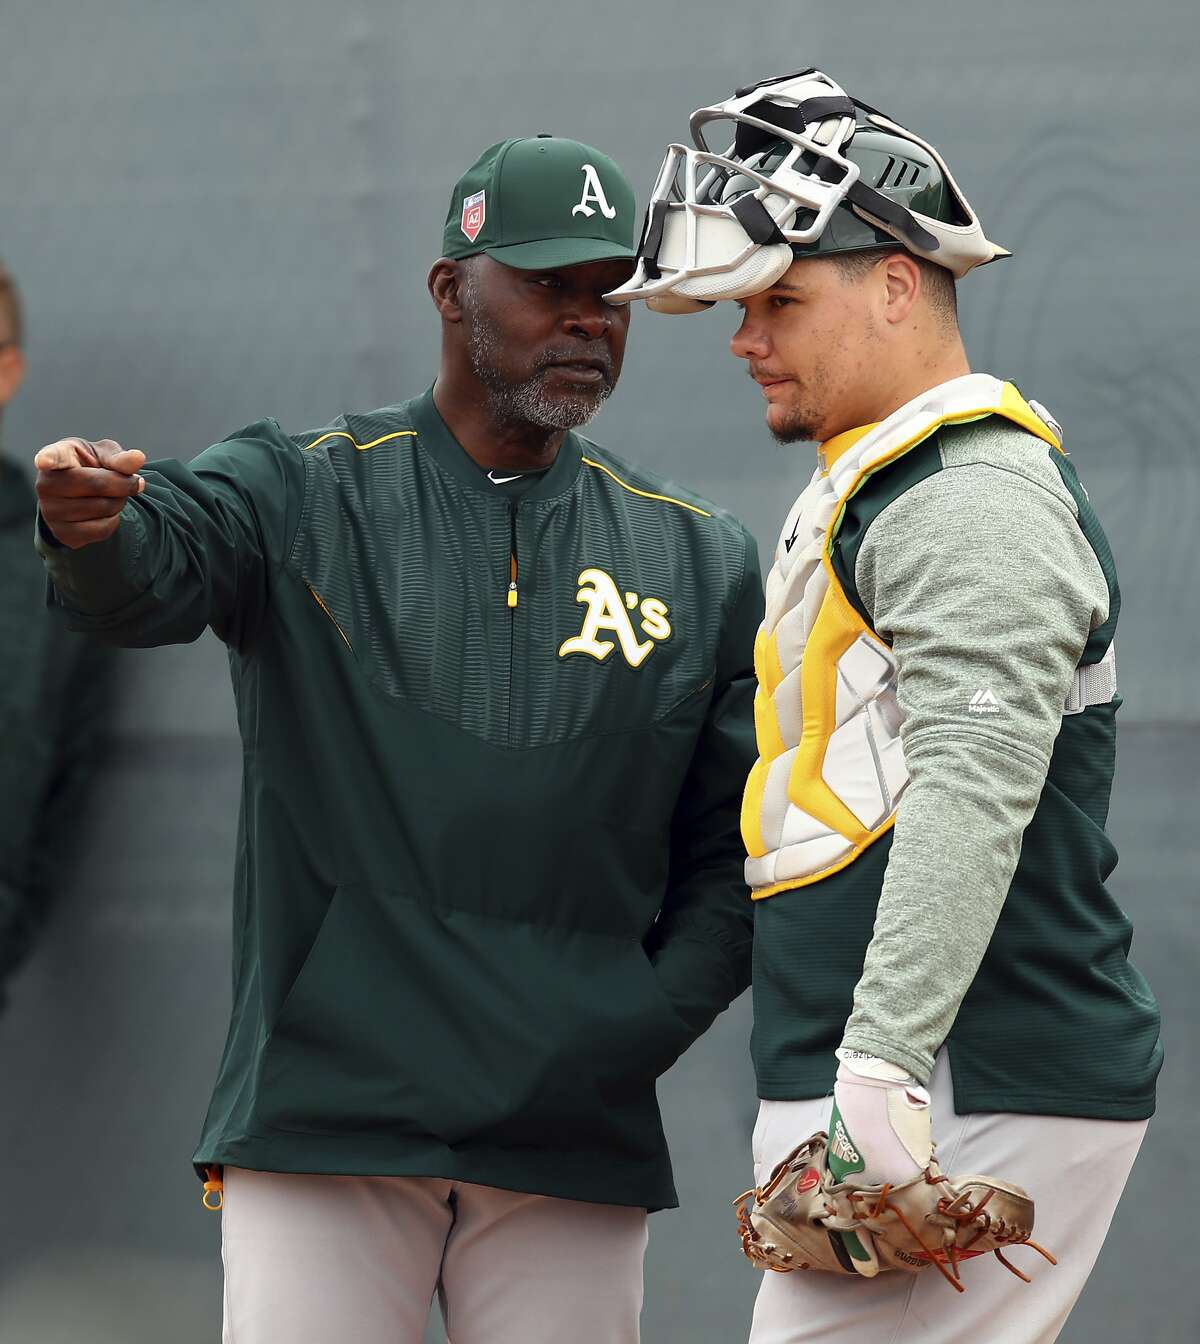 Oakland Athletics special instructor Dave Stewart, left, speaks with catcher Bruce Maxwell during a spring training baseball practice on Friday, Feb. 16, 2018 in Mesa, Ariz. (AP Photo/Ben Margot)